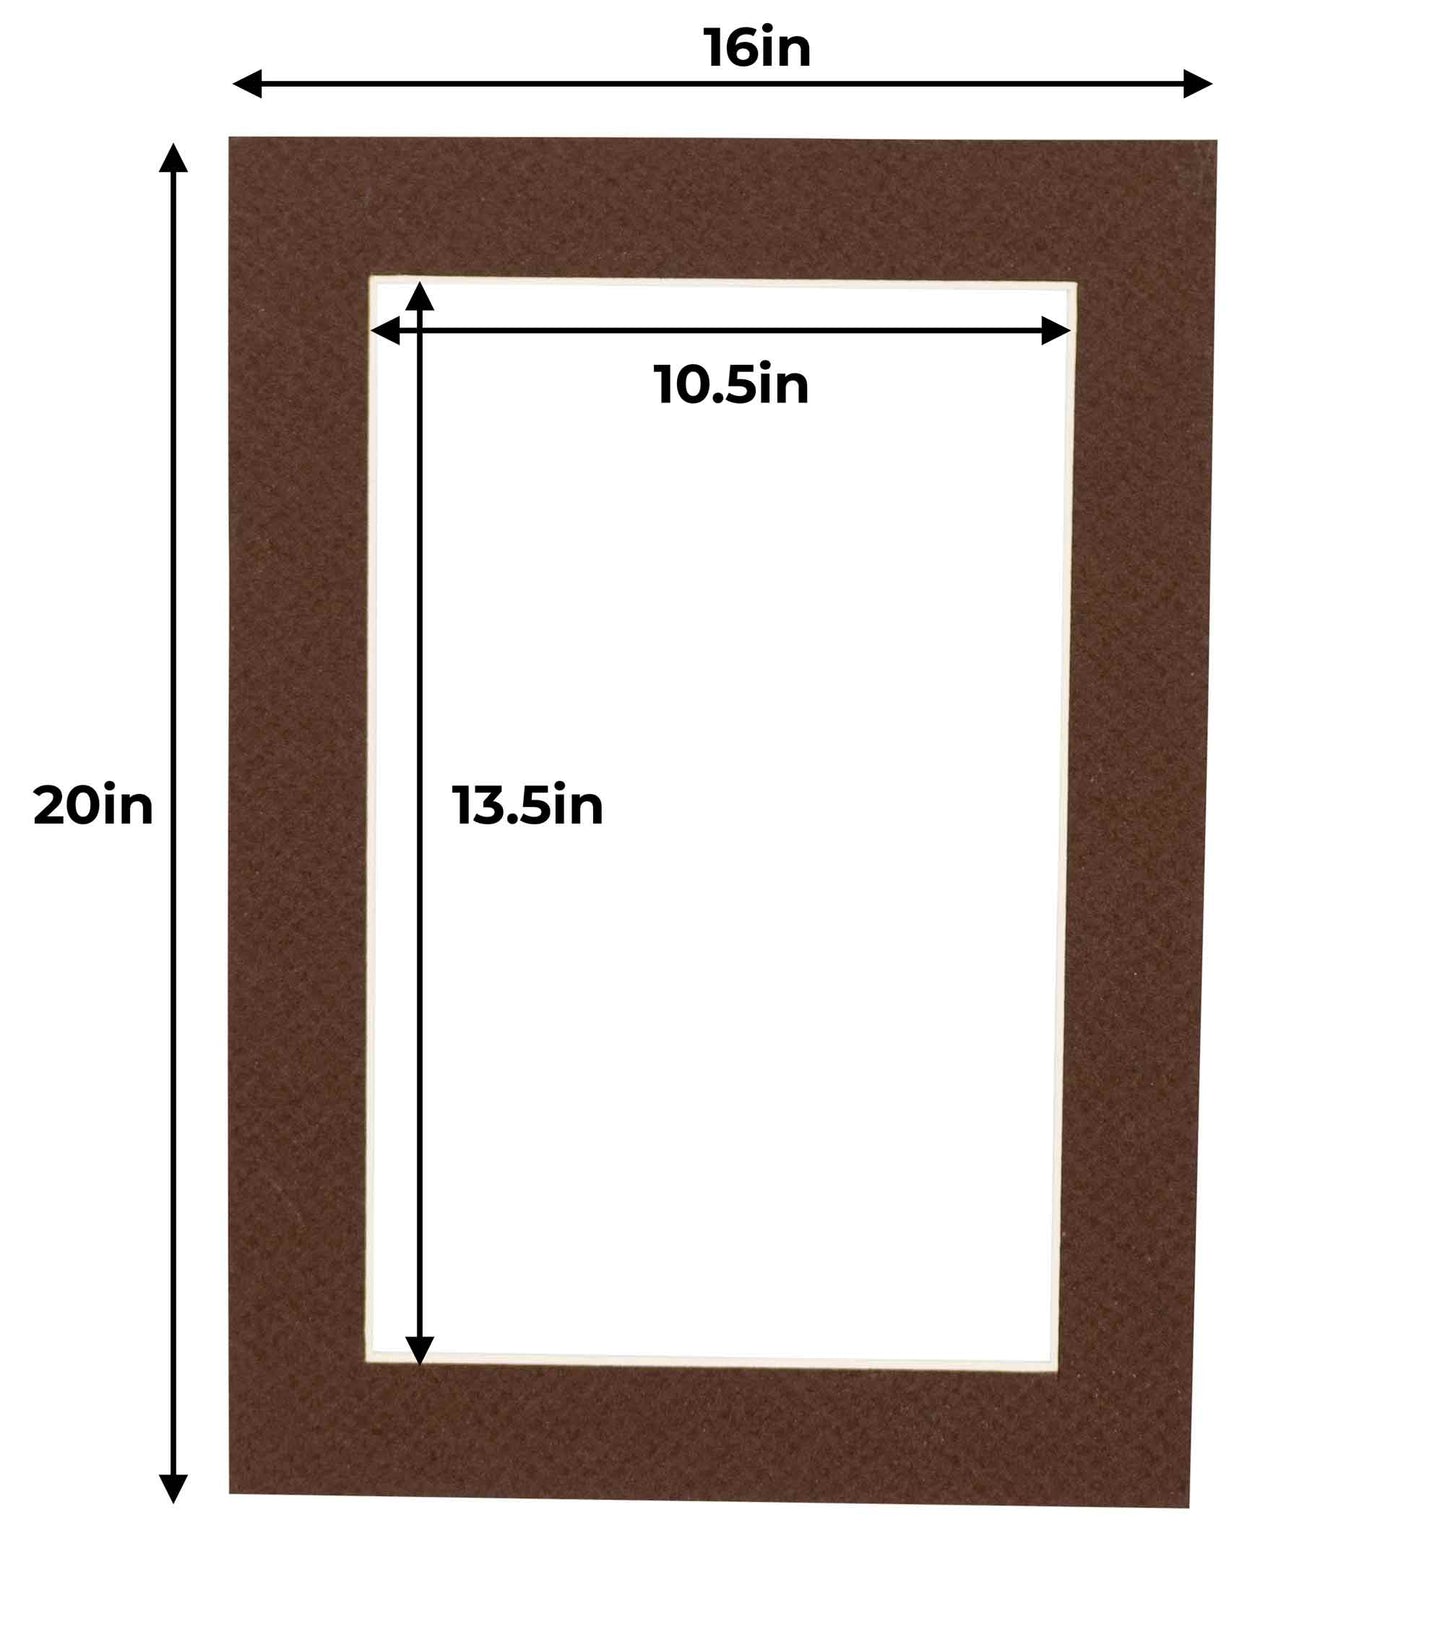 Pack of 10 Chocolate Brown Precut Acid-Free Matboard Set with Clear Bags & Backings